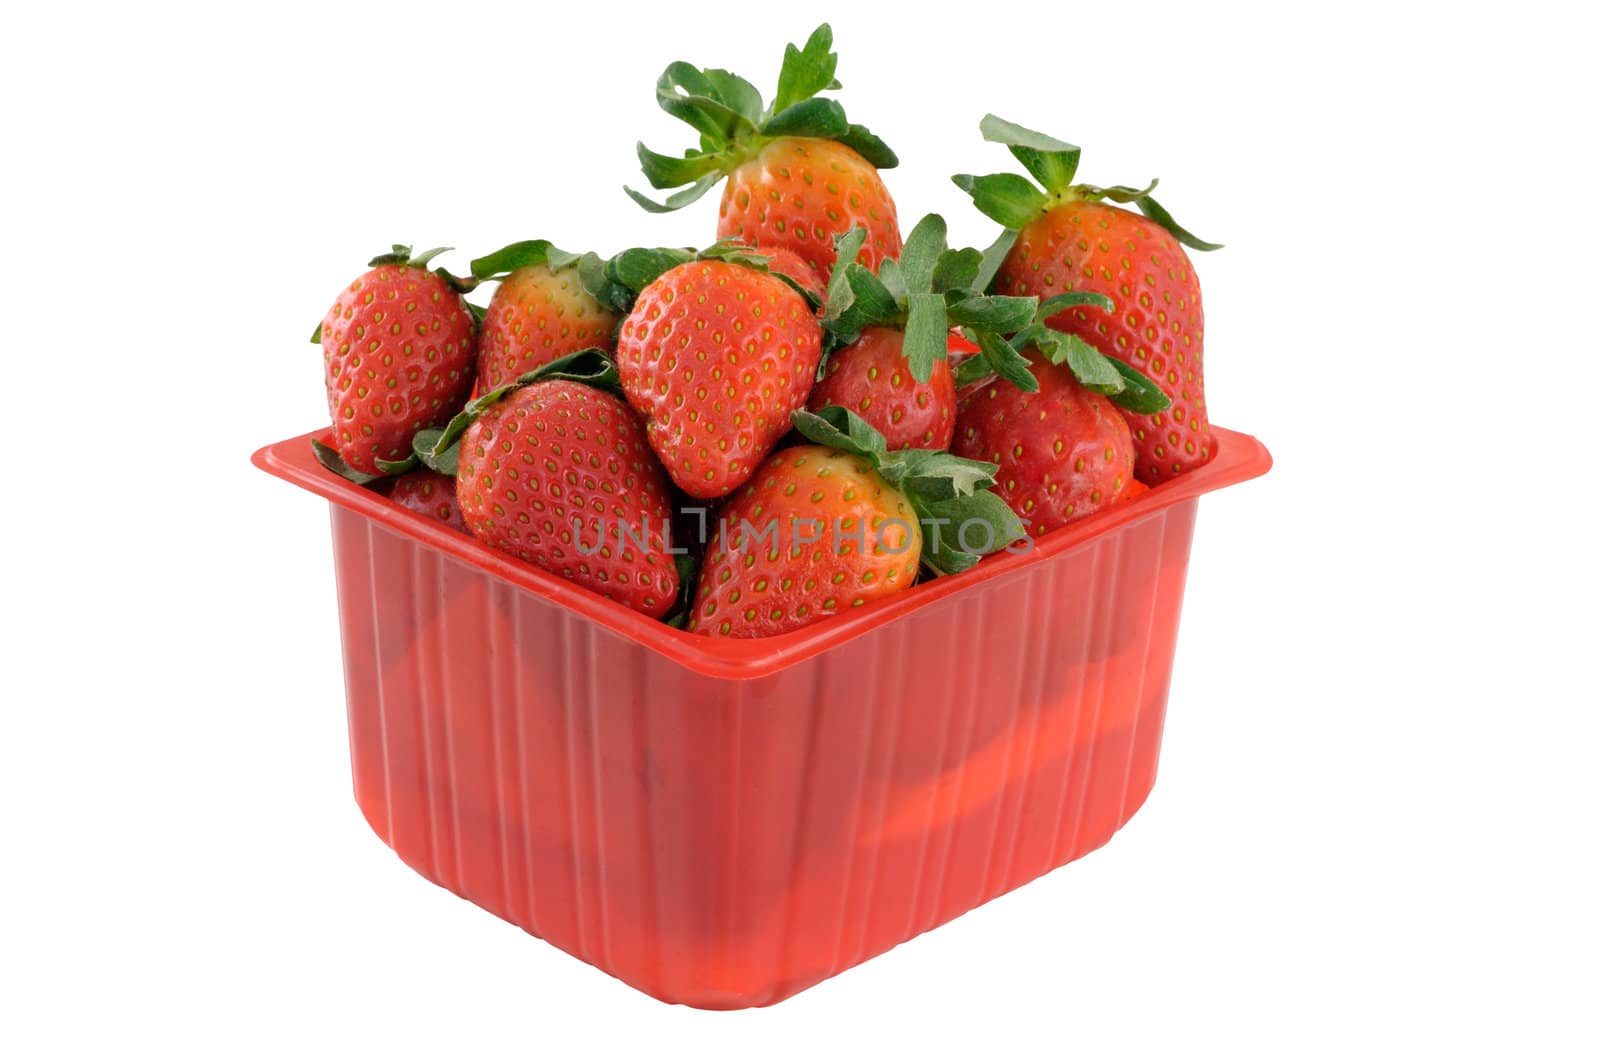 Punnet filled with strawberries by Hbak